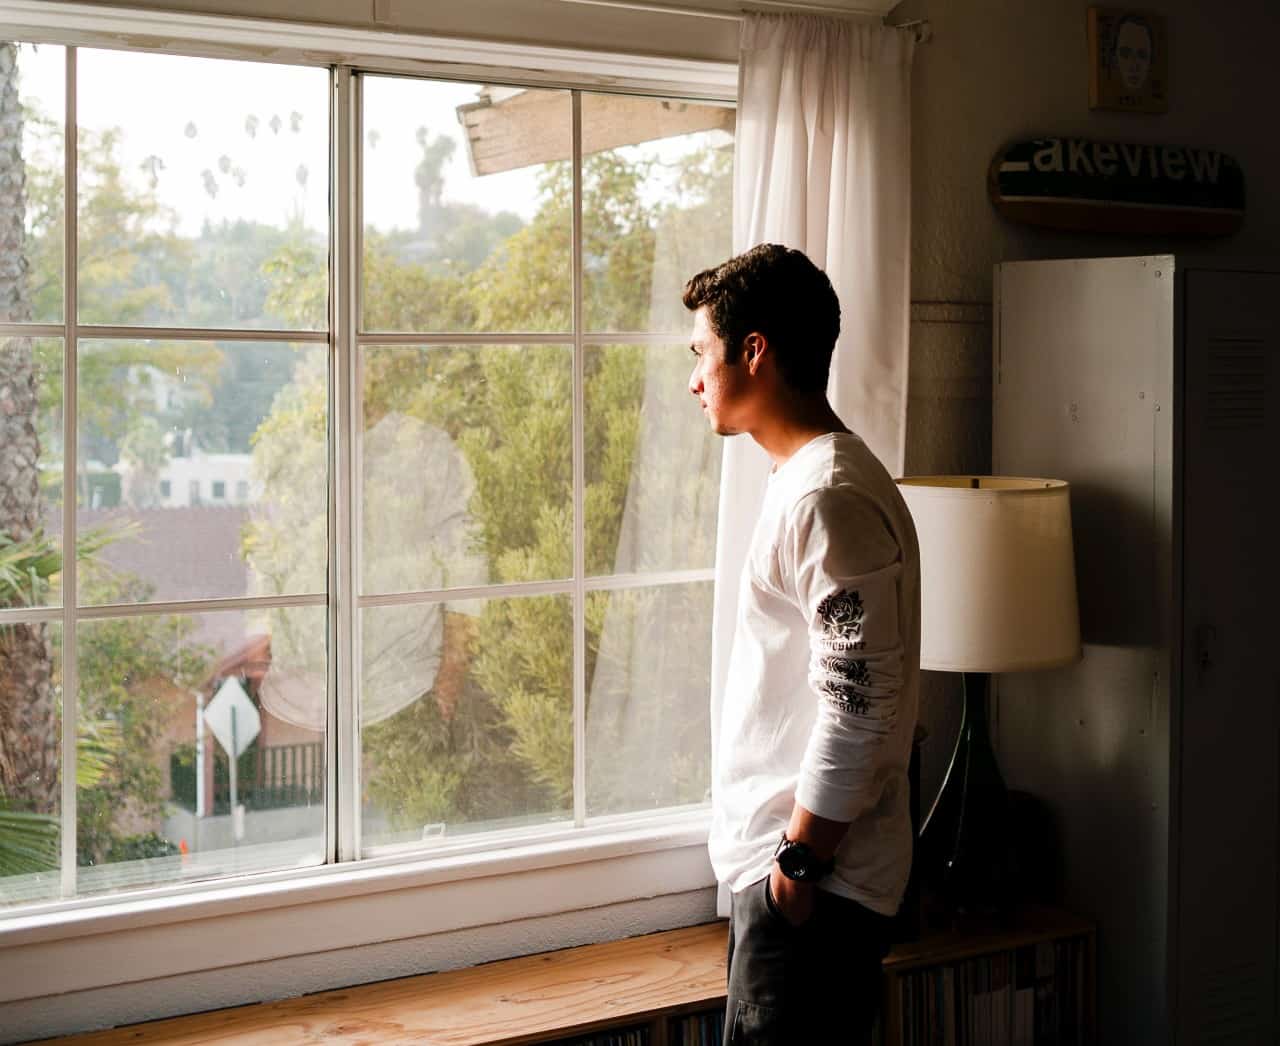 A man looking out a window with a thoughtful look on his face.